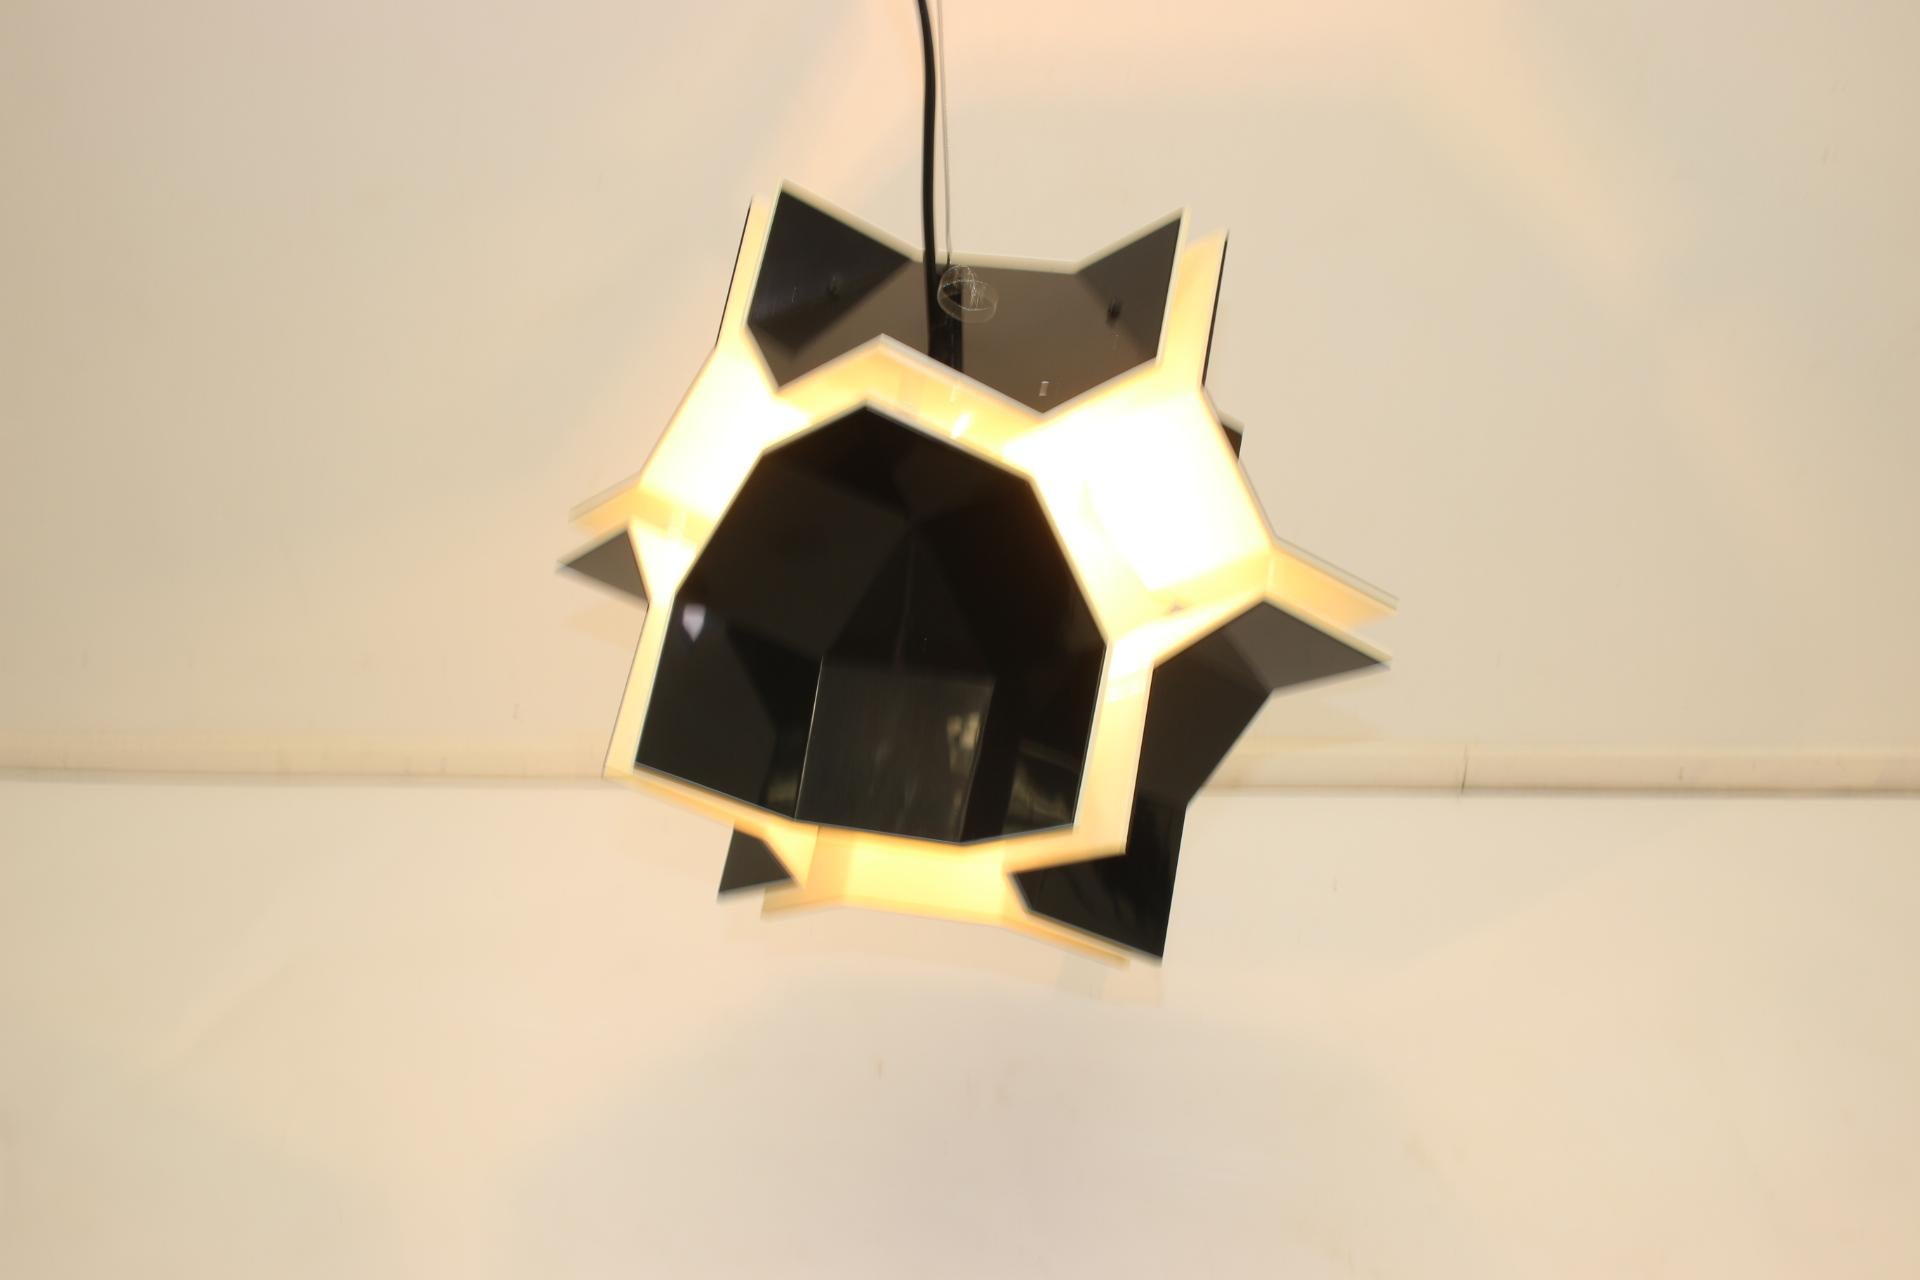 Space Age Acrylic Pendant Lamp by Christophe de Ryck for Dark, 1970s For Sale 7